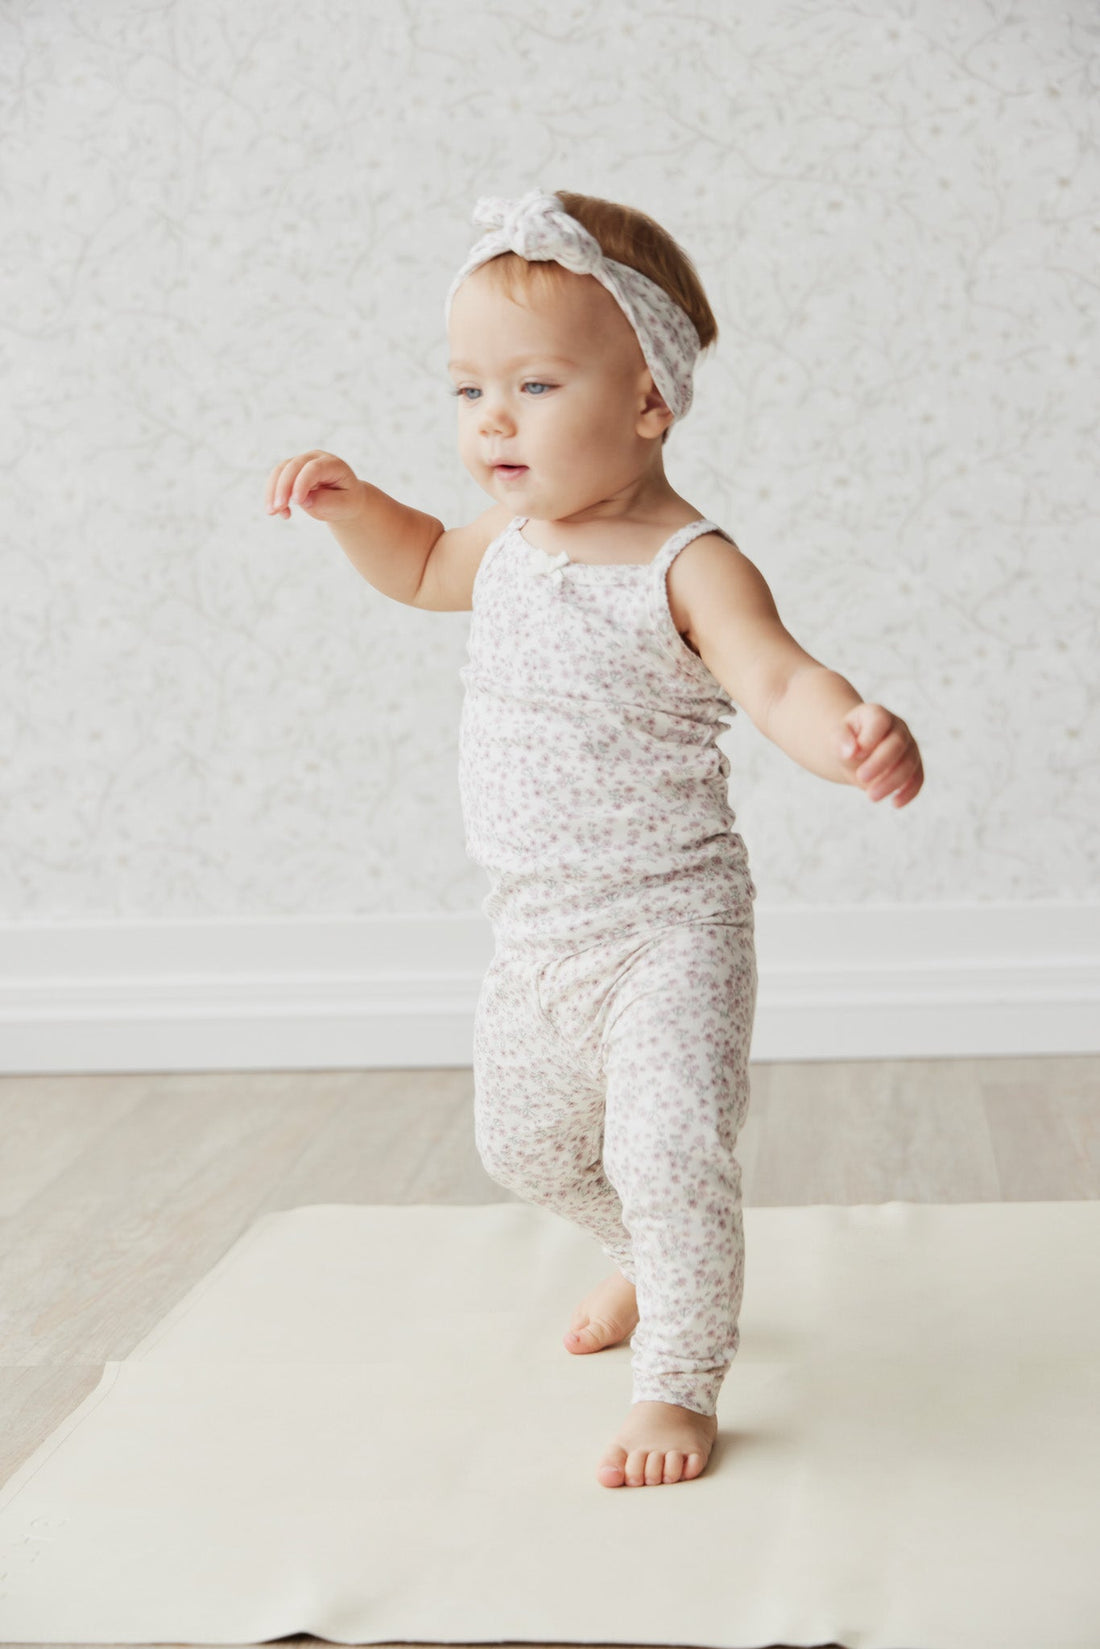 Organic Cotton Singlet - Posy Floral Childrens Singlet from Jamie Kay USA